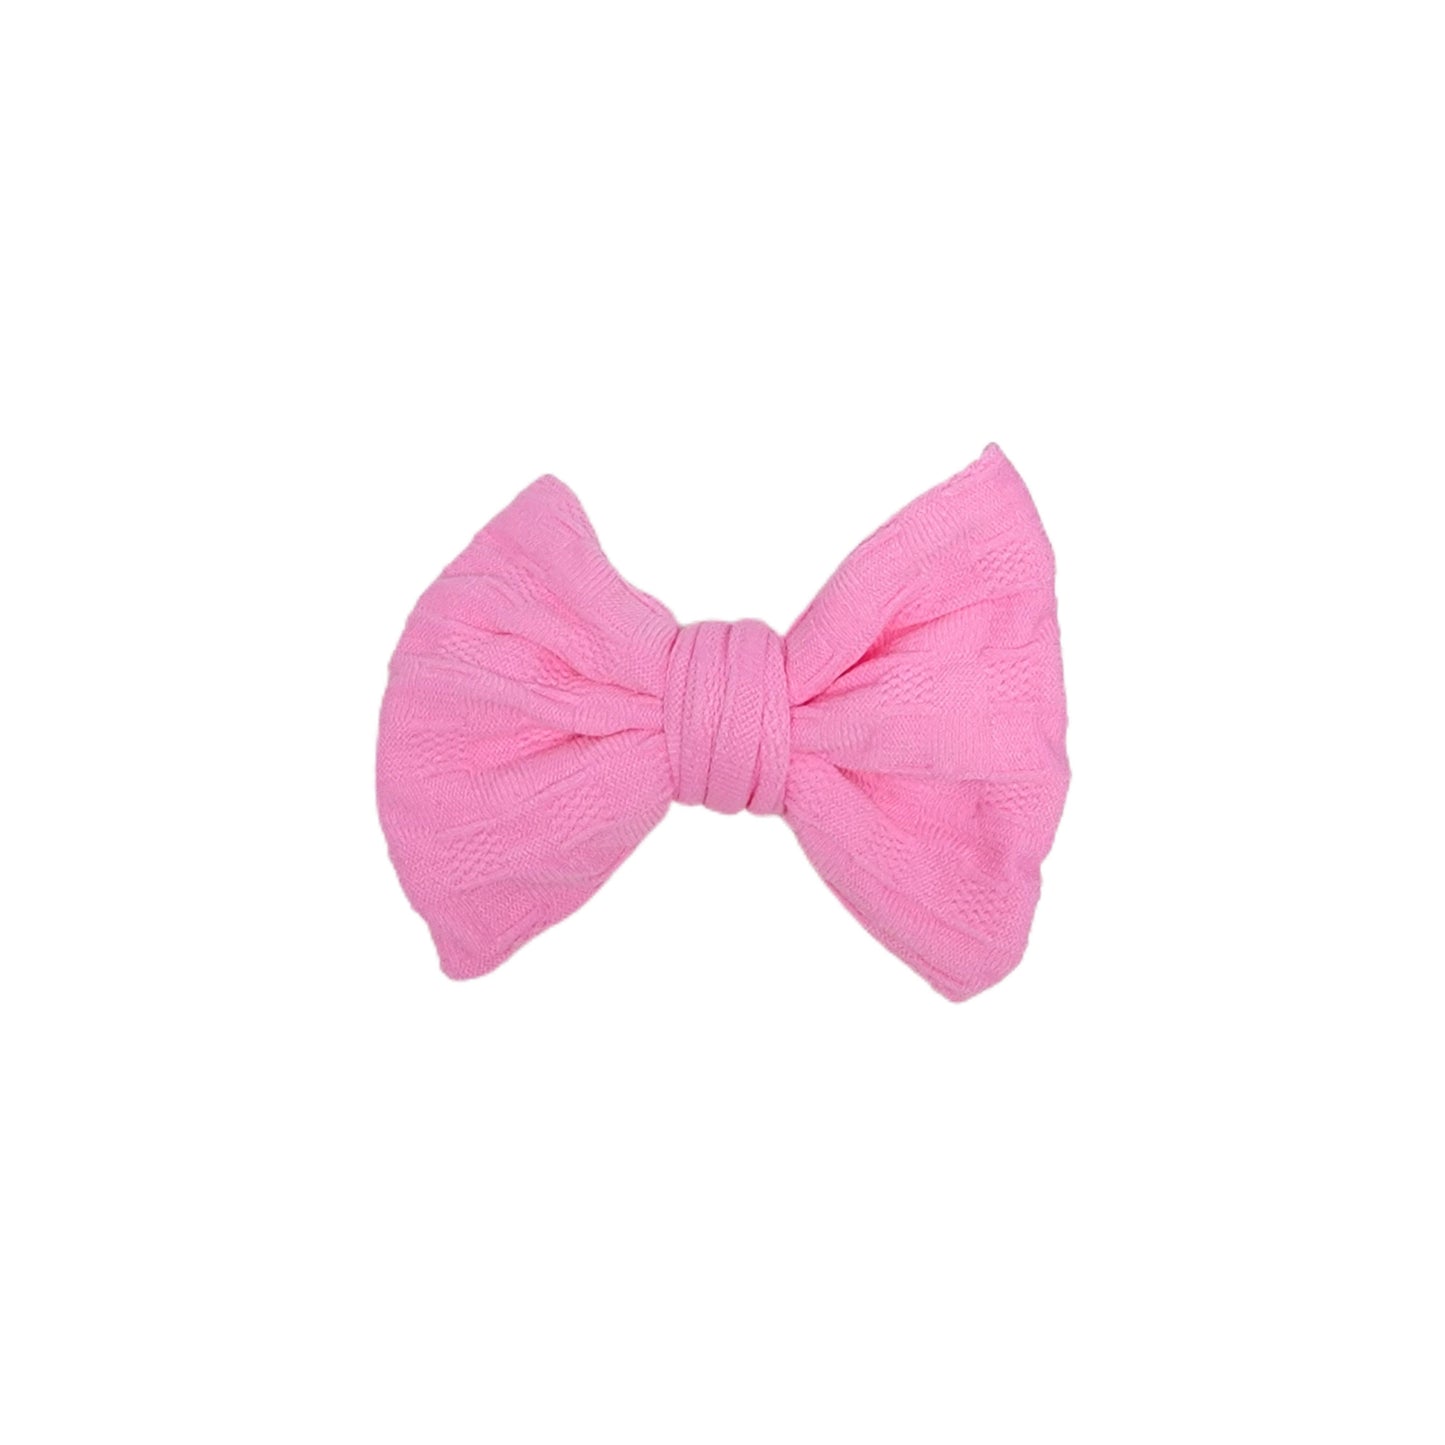 Pink Woven Knit Fabric Bow 4" 